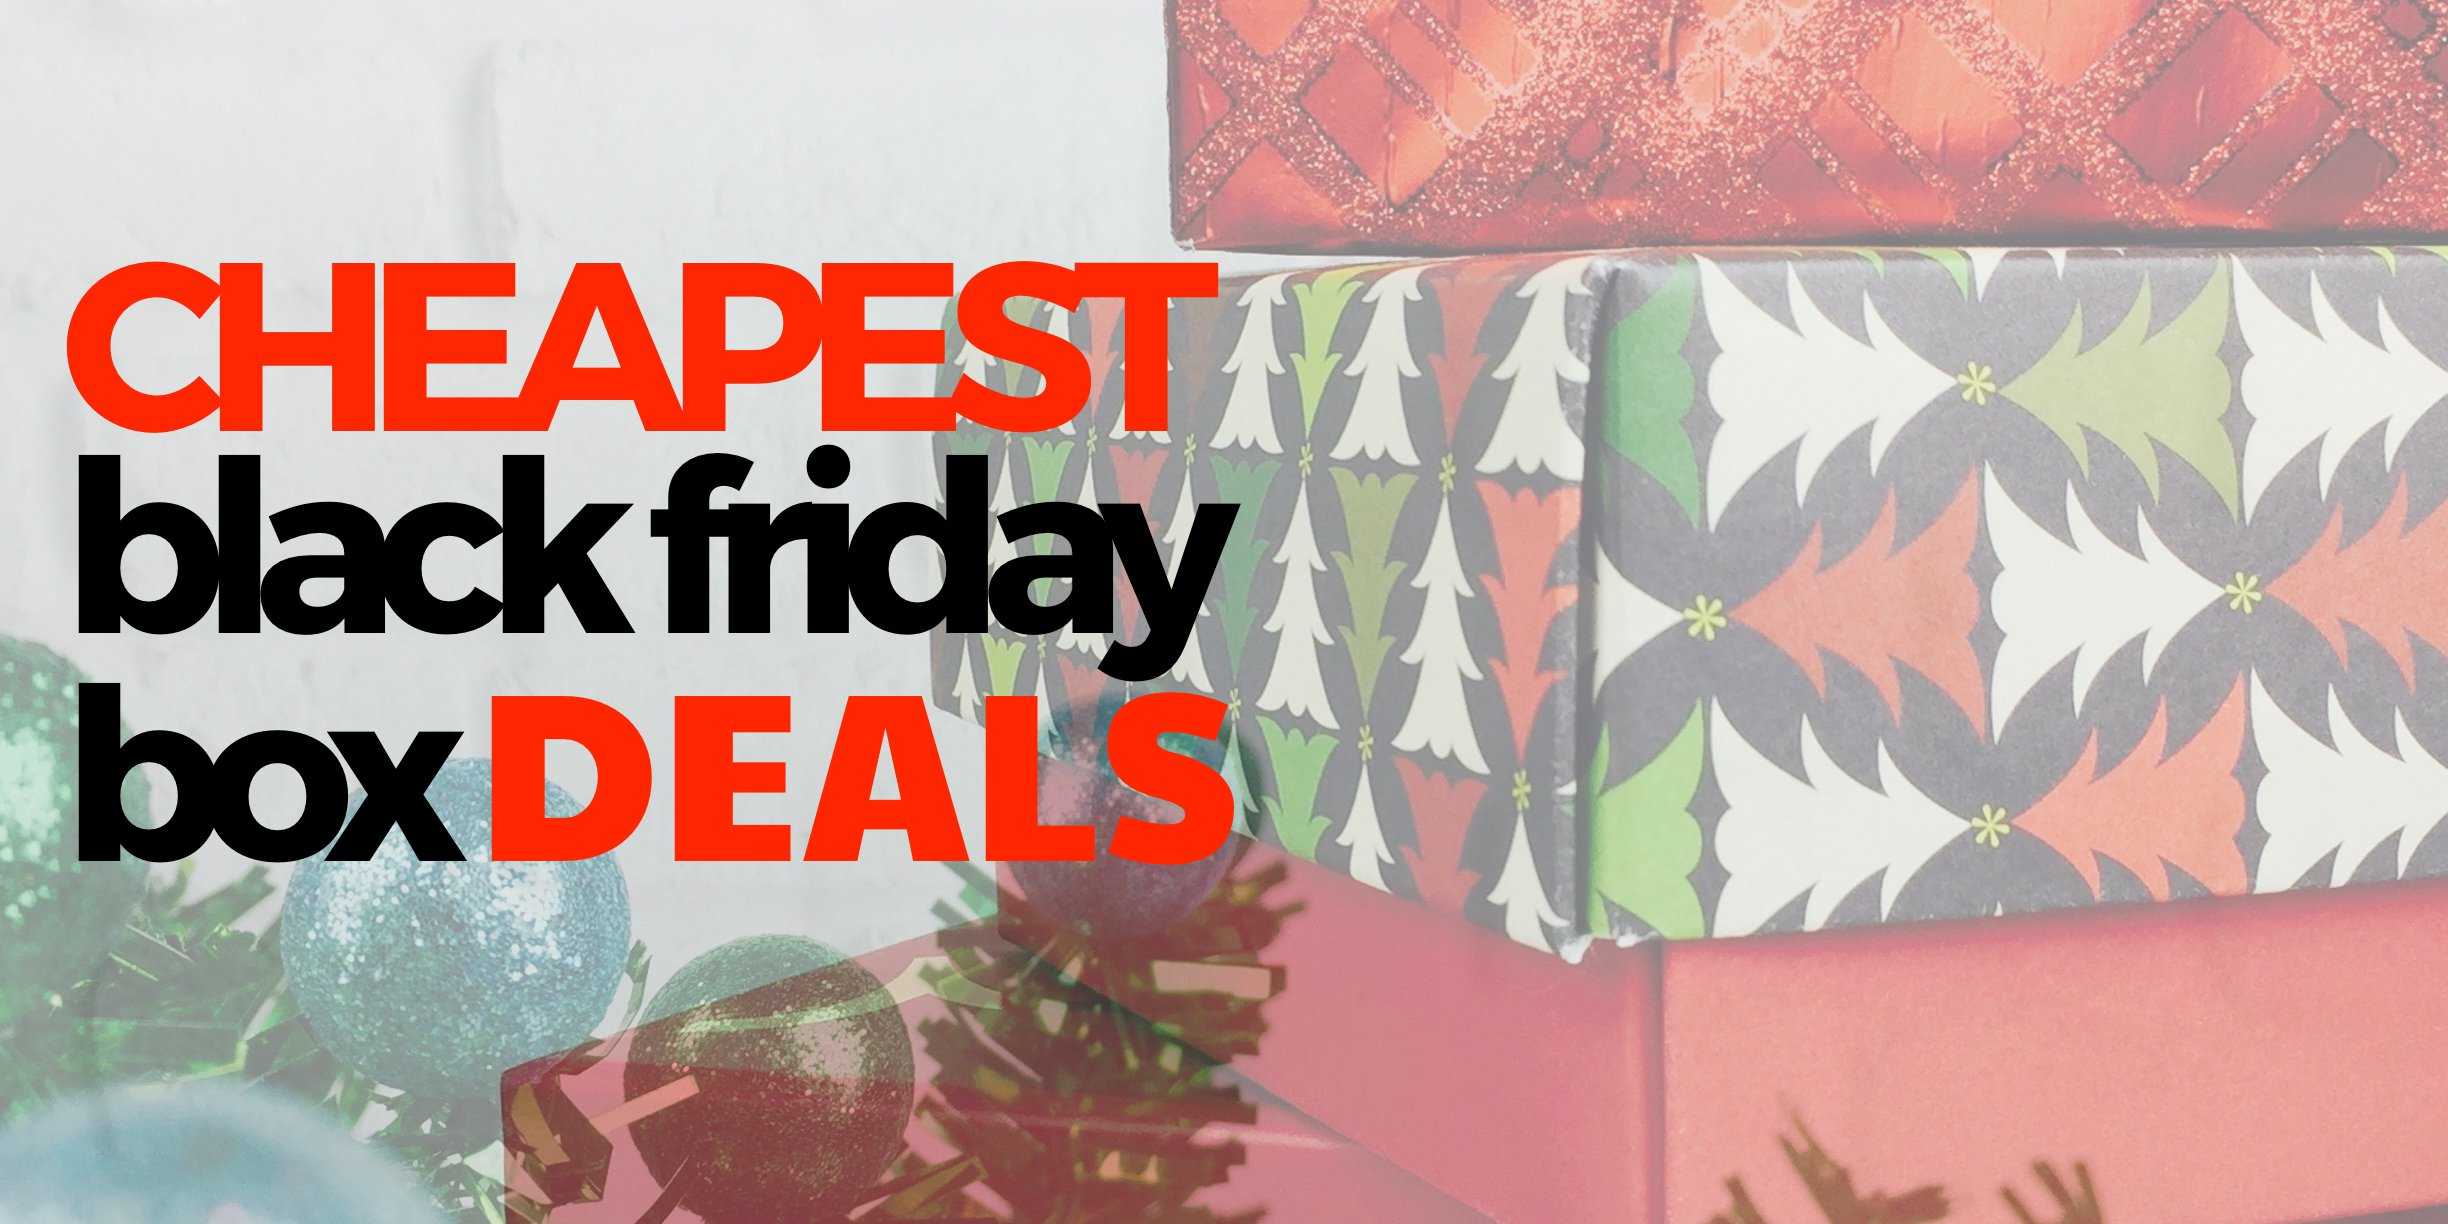 Free & Cheap Subscription Box Deals for Black Friday! Hello Subscription